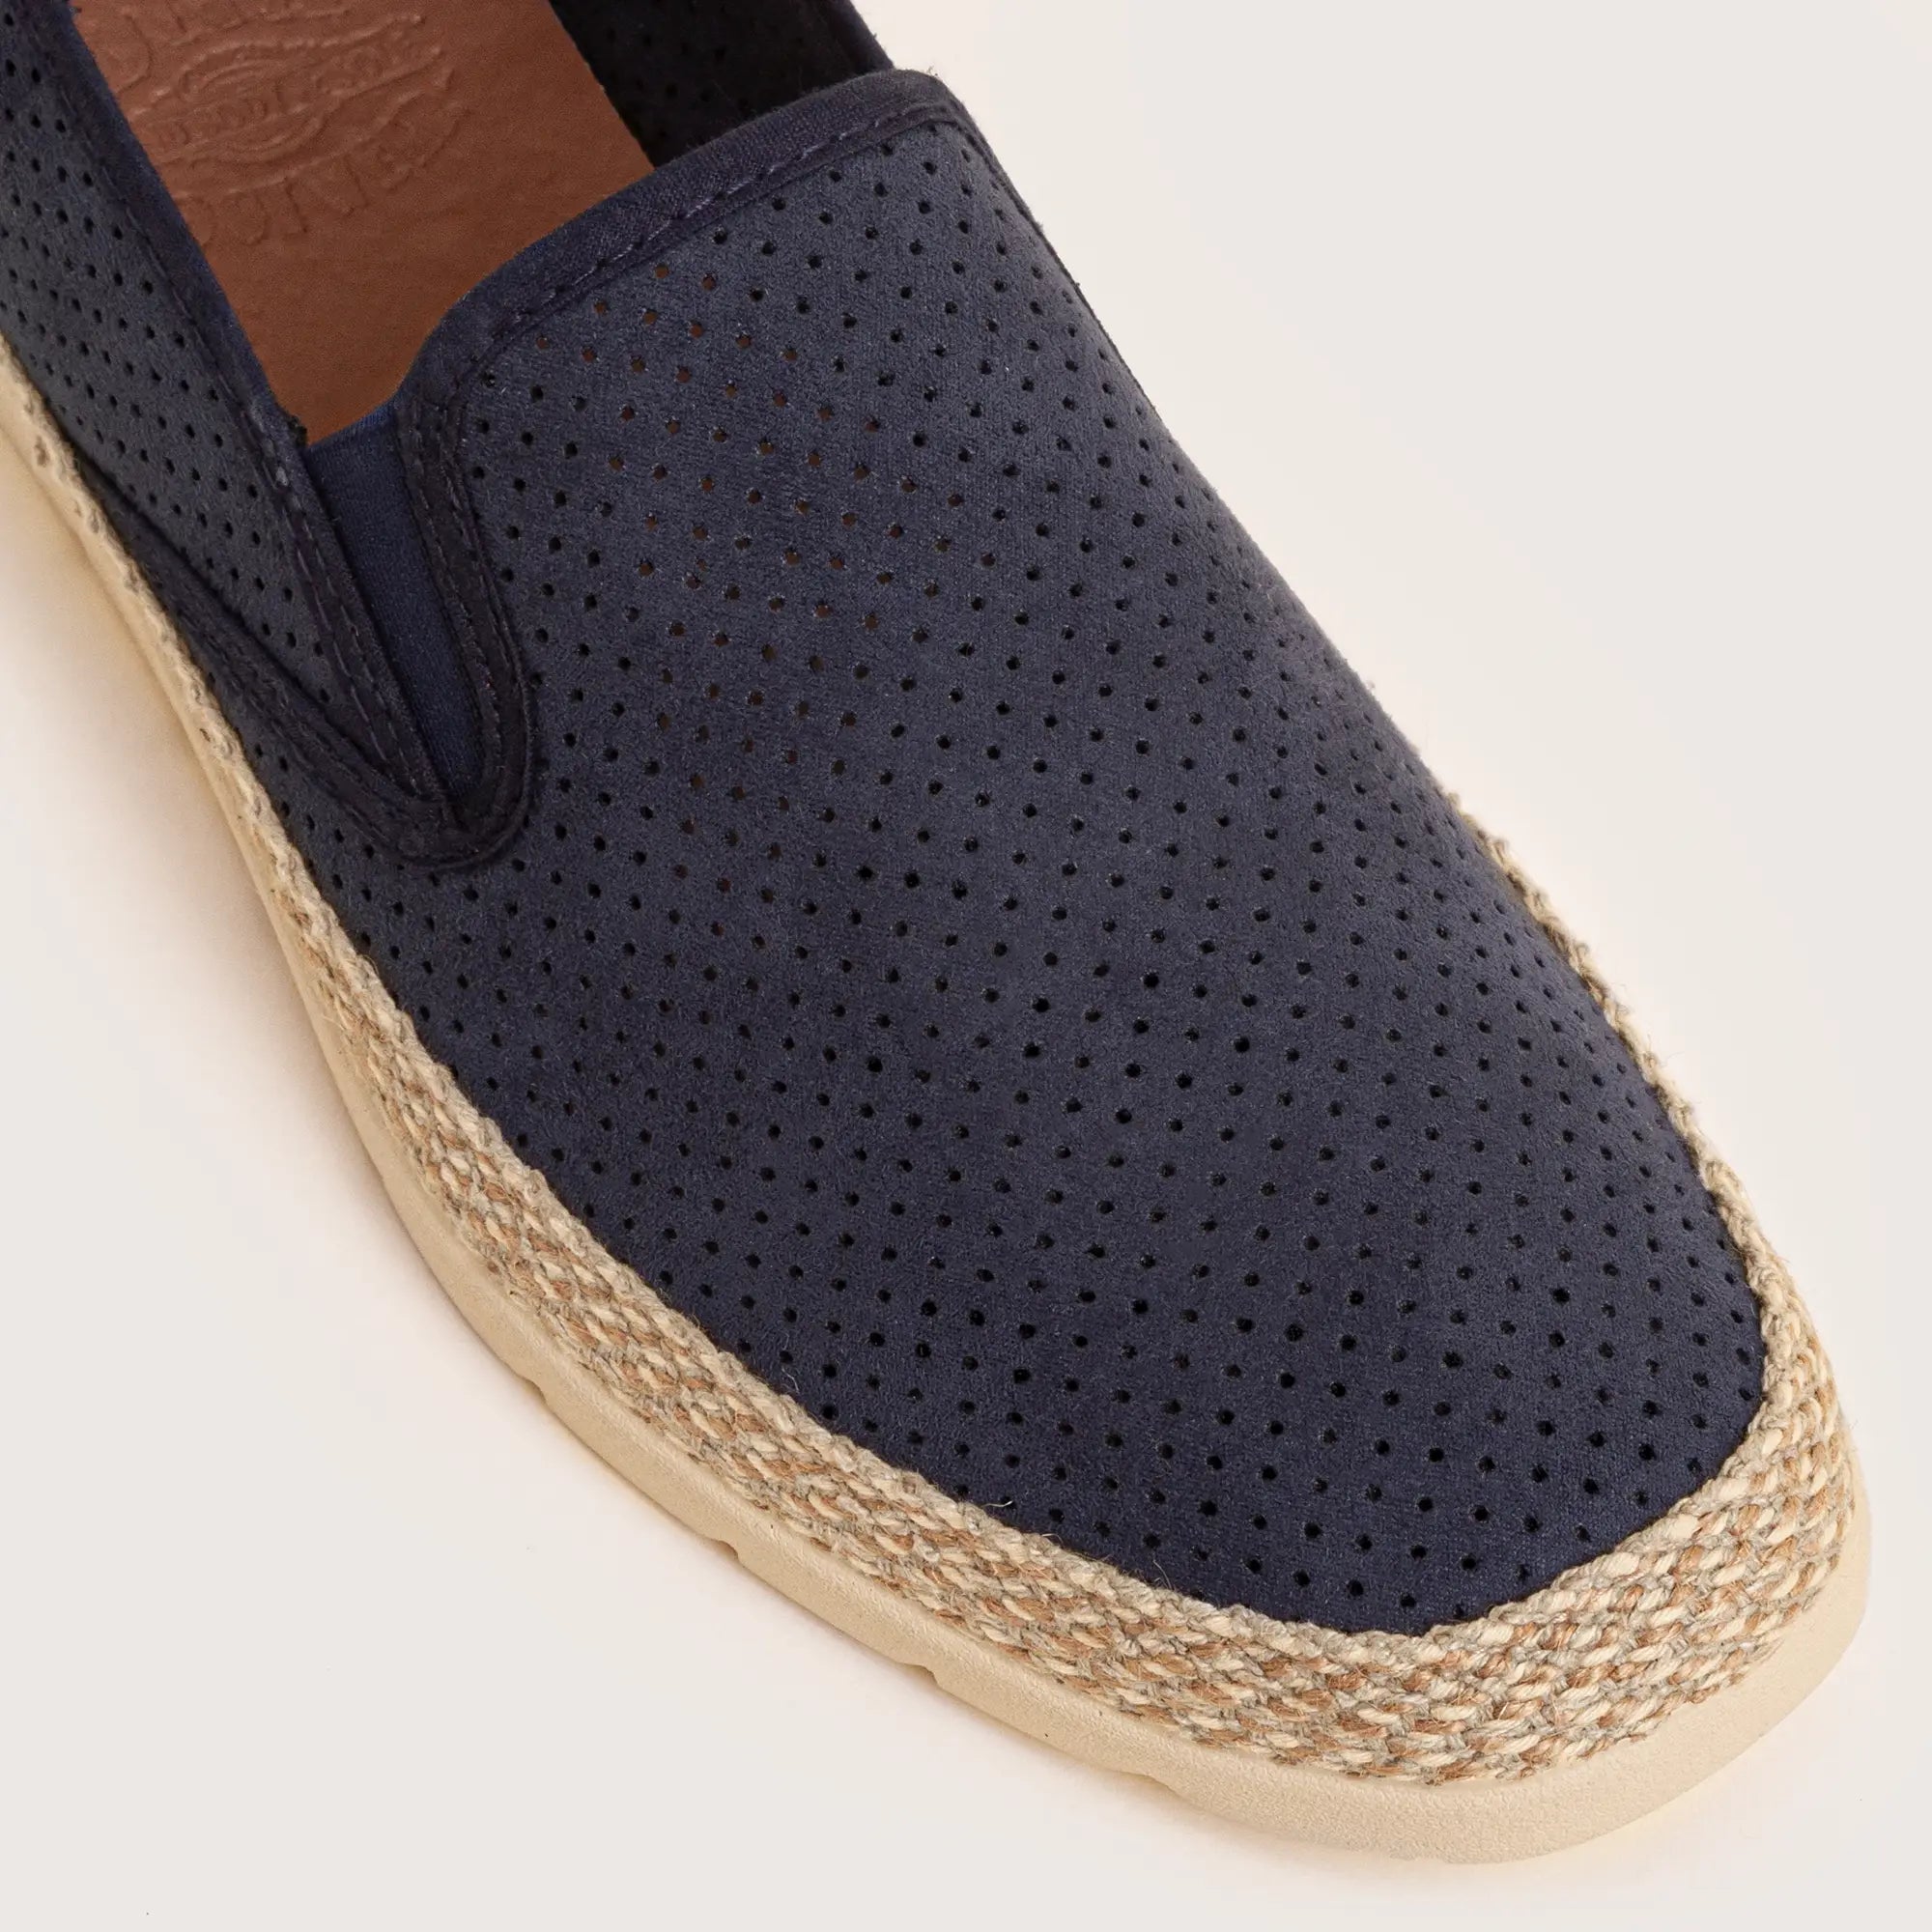 Butler Perforated Suede Slip On - Navy